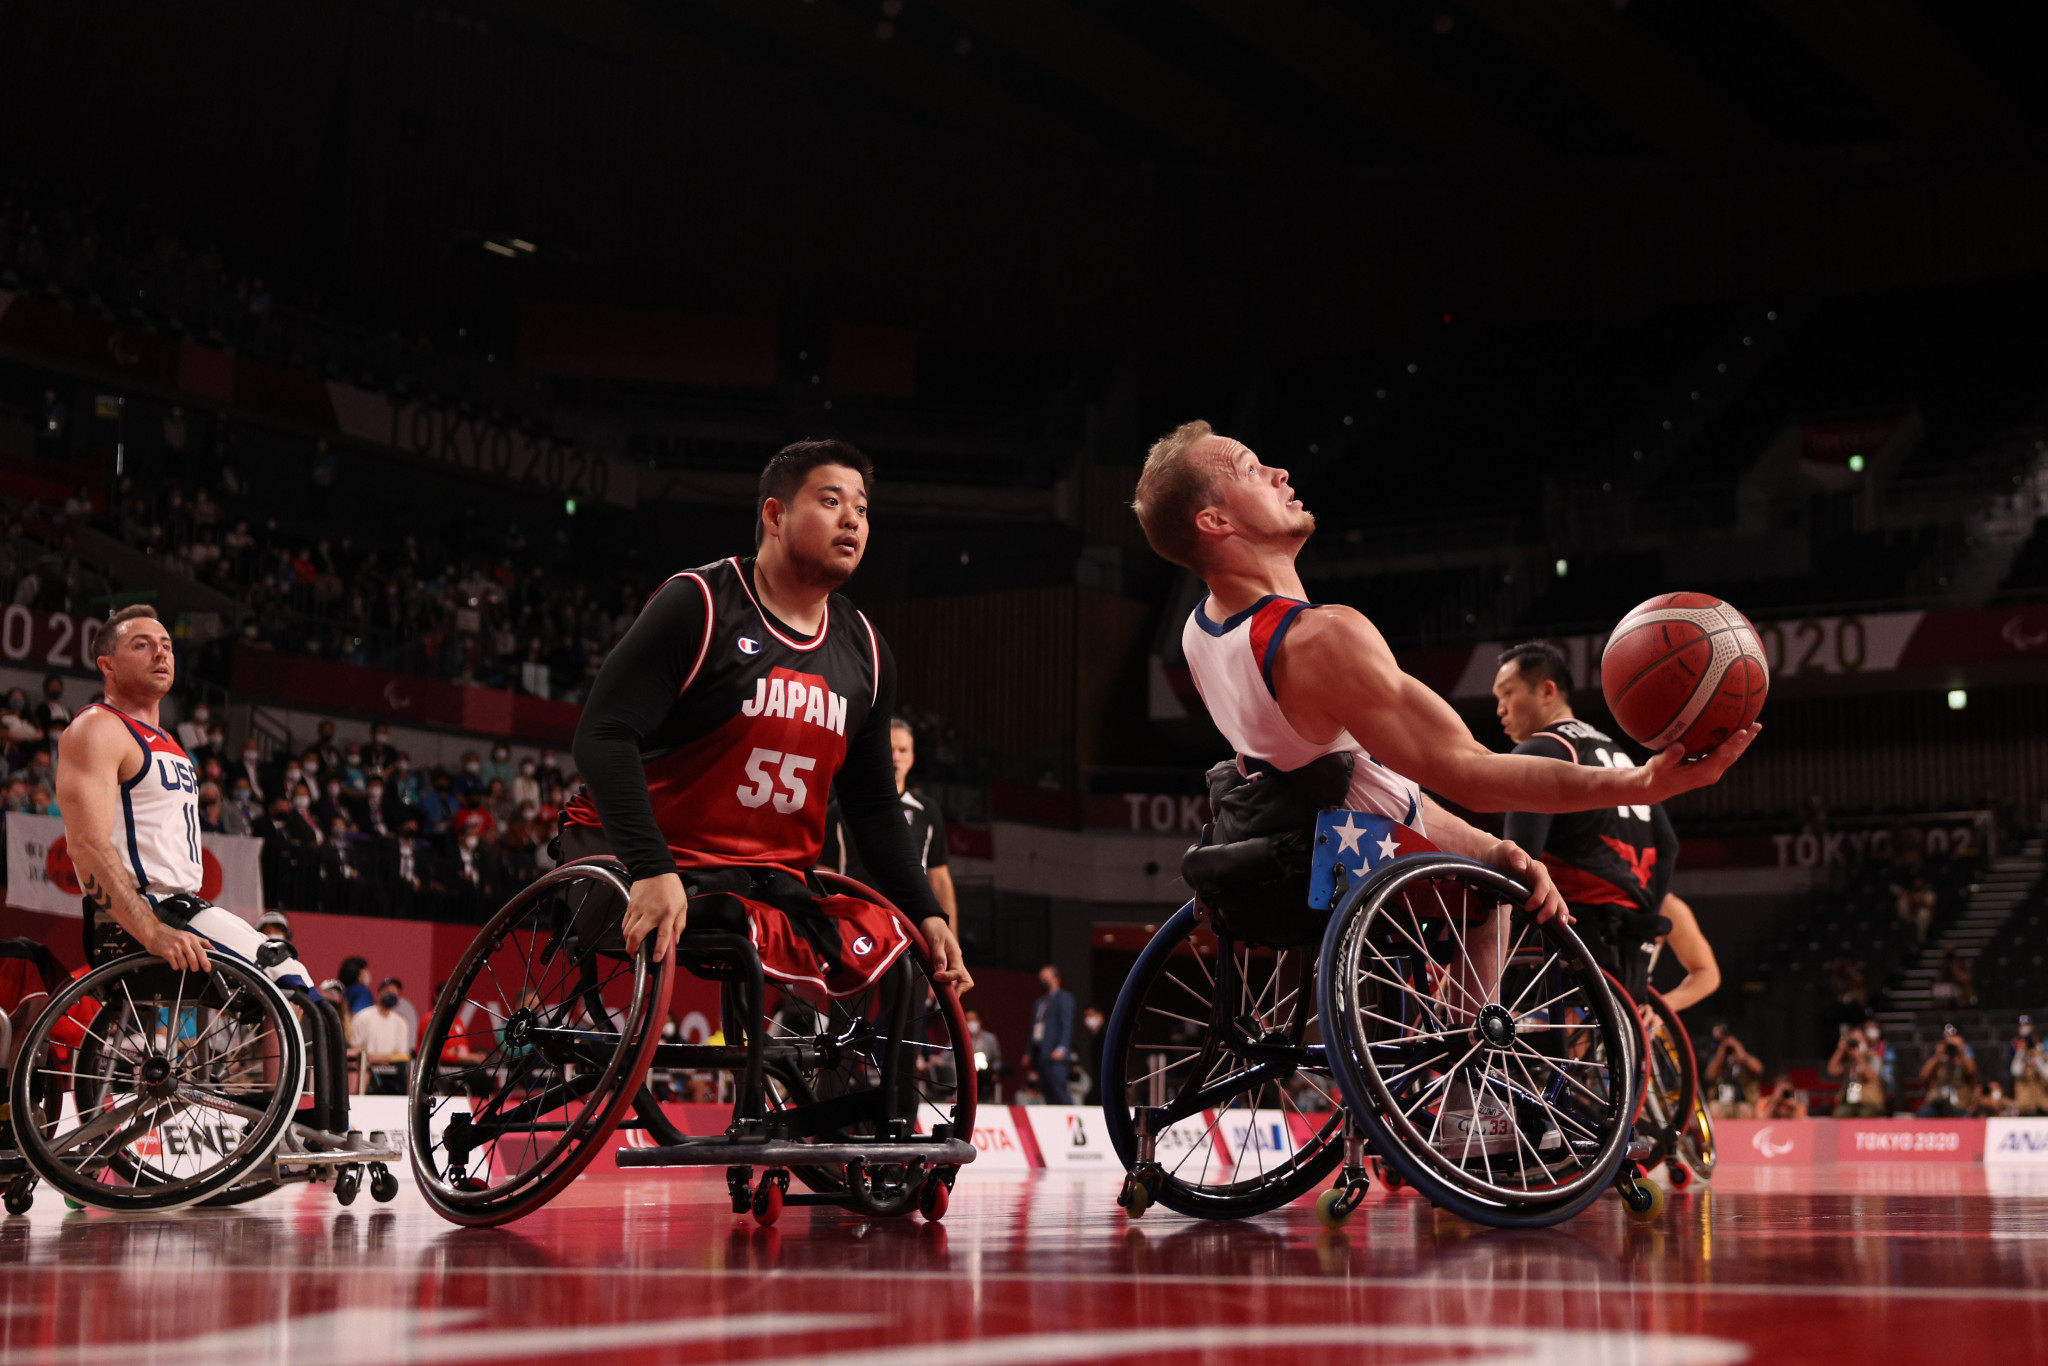 John Boie, with ball, and Hiroaki Kozai, number 55, have been elected to the IWBF Athletes' Commission ©Getty Images